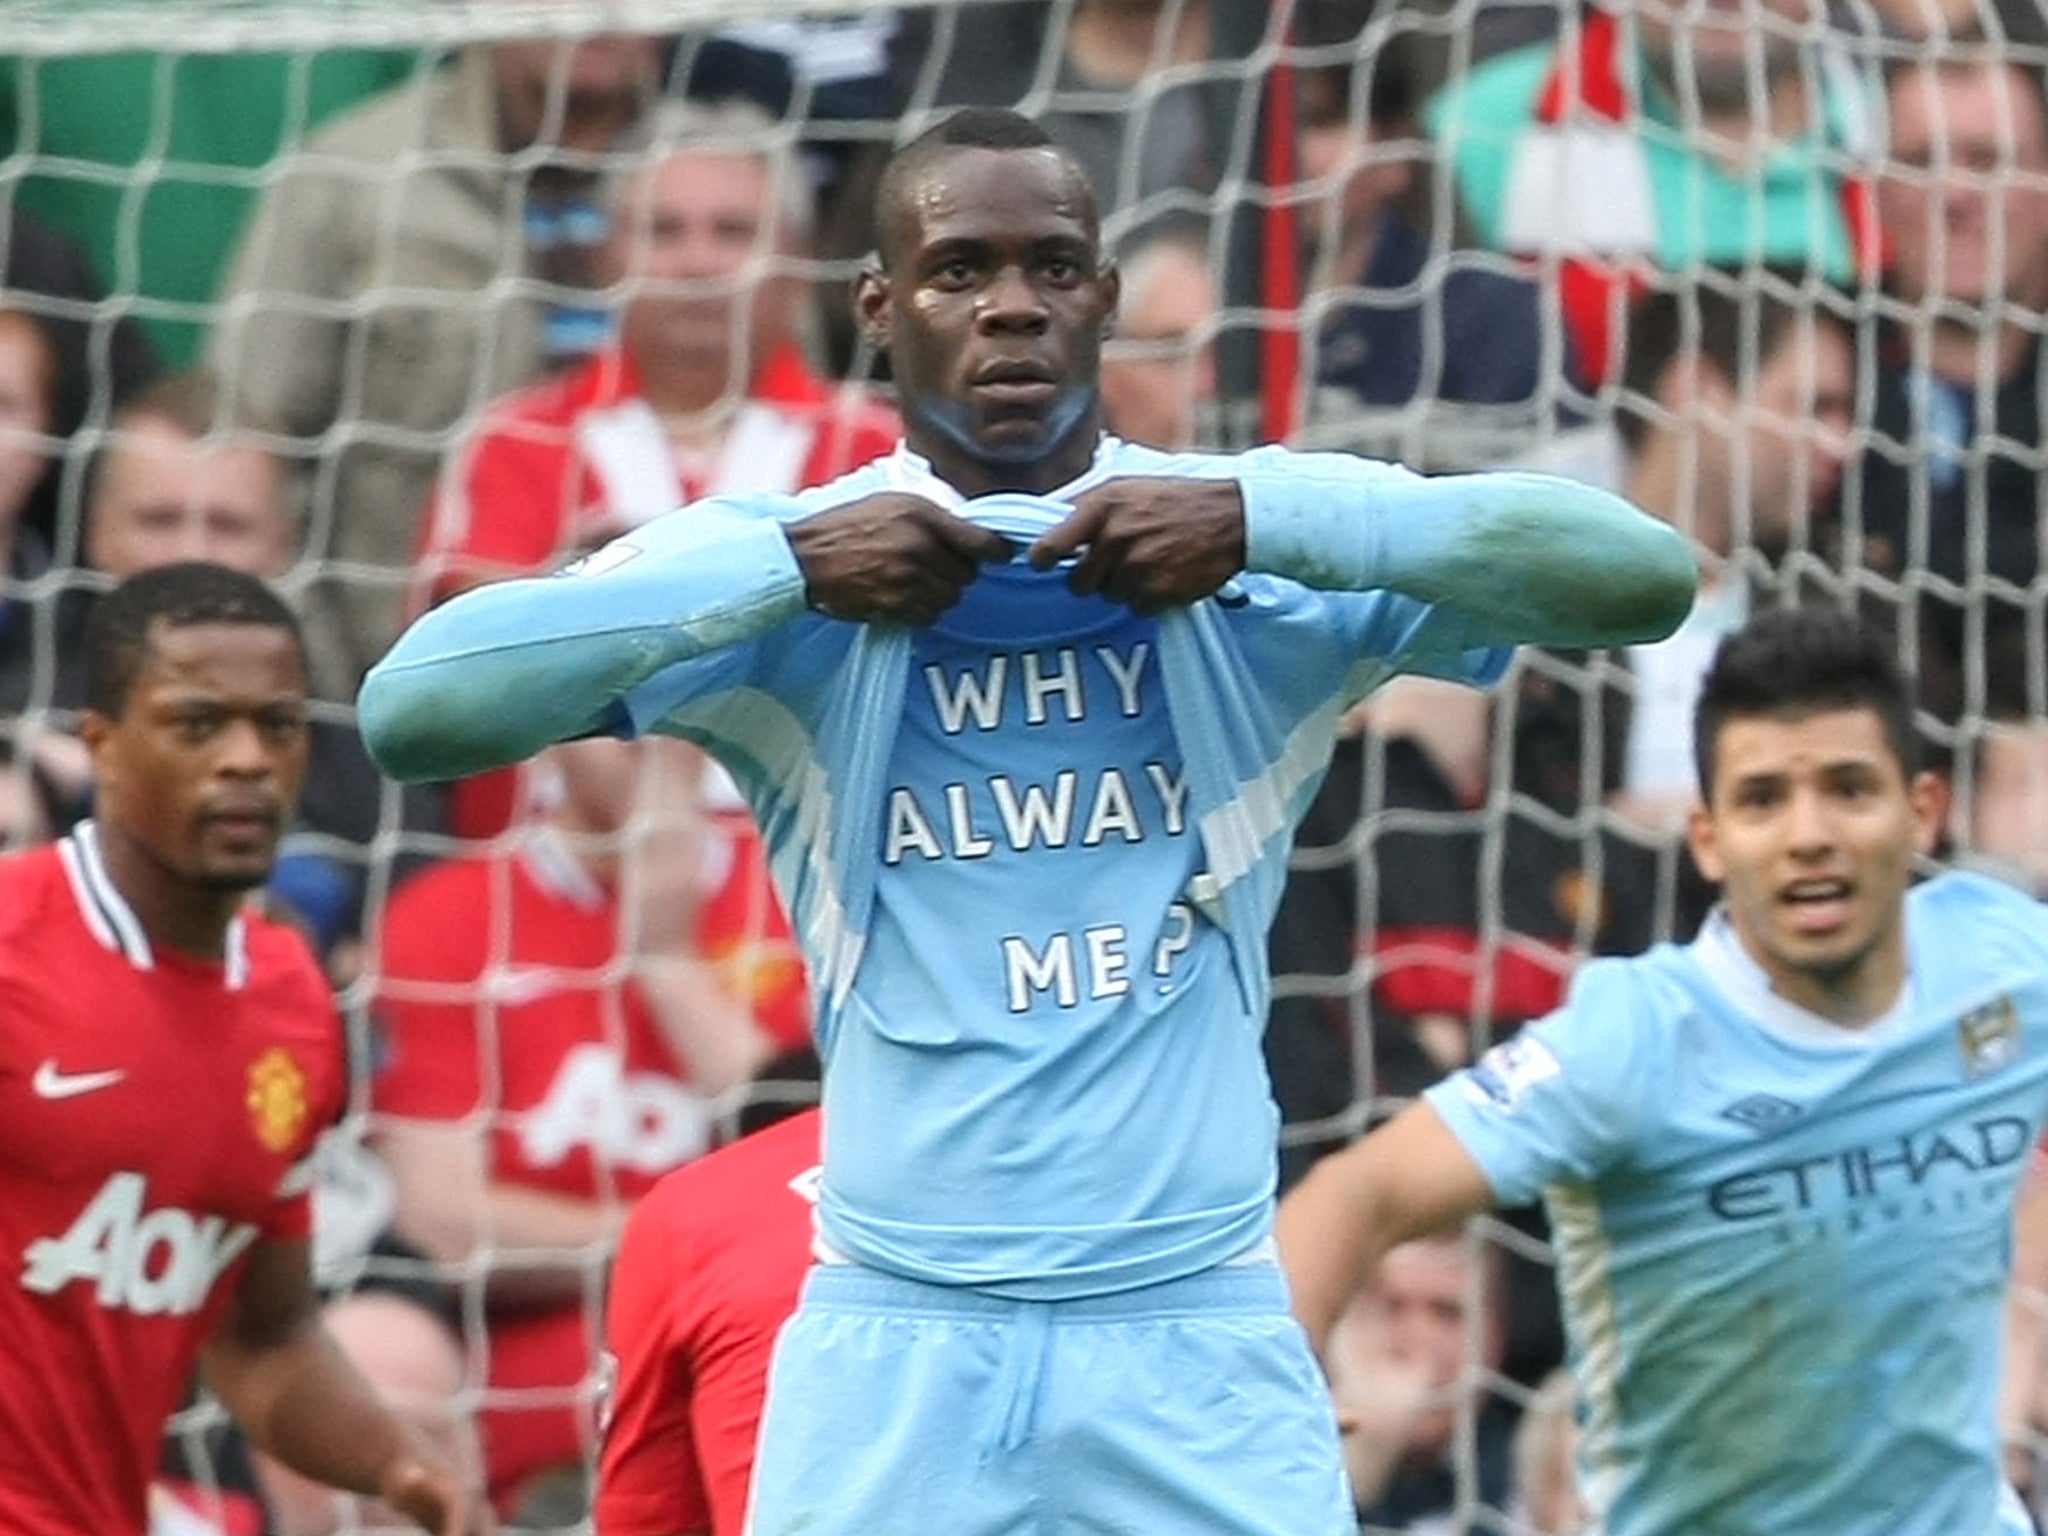 Mario Balotelli unveils his now infamous T-shirt against United back in 2011